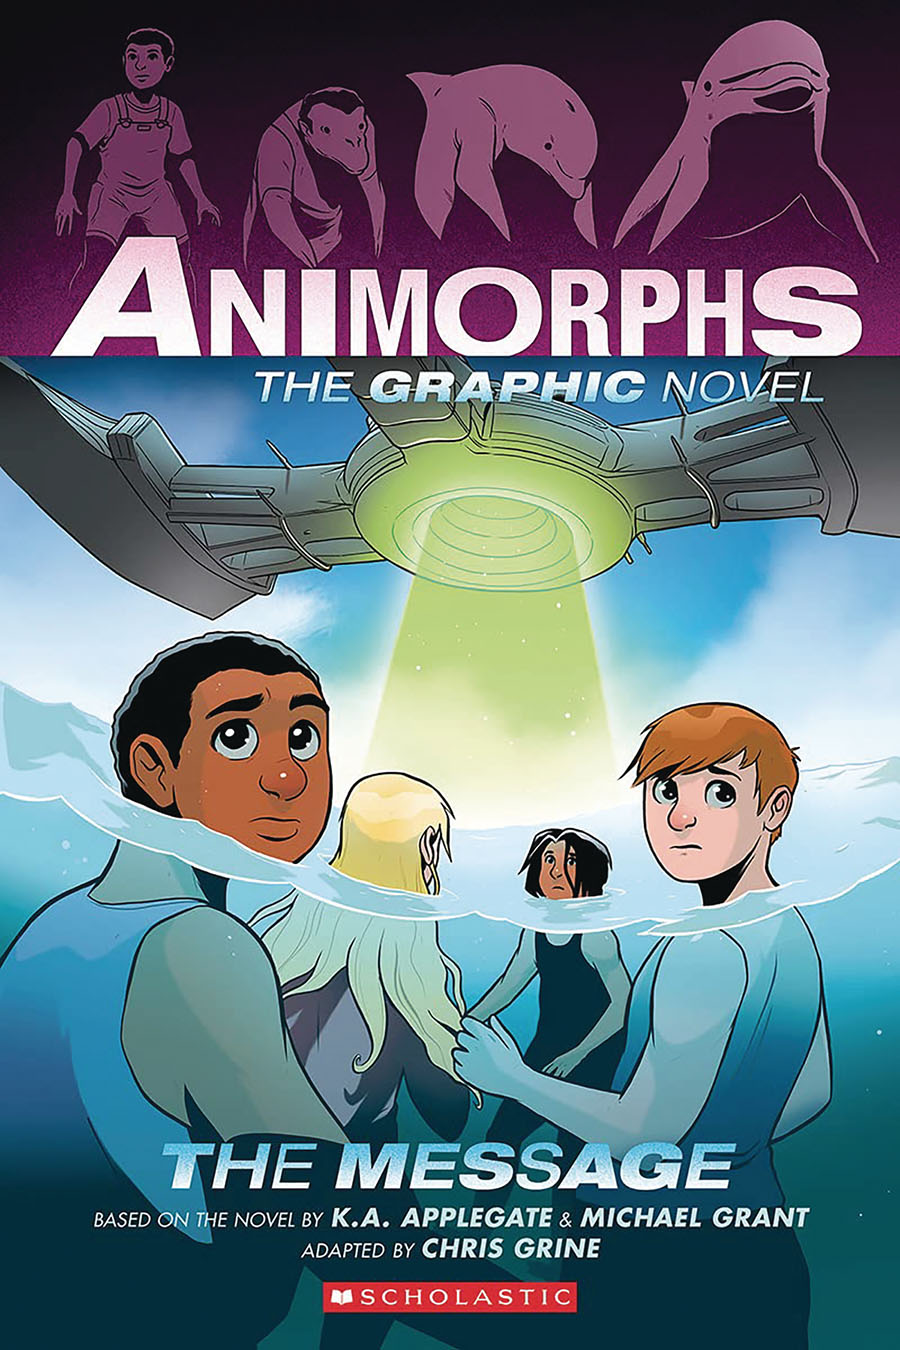 Animorphs The Graphic Novel Vol 4 The Message TP